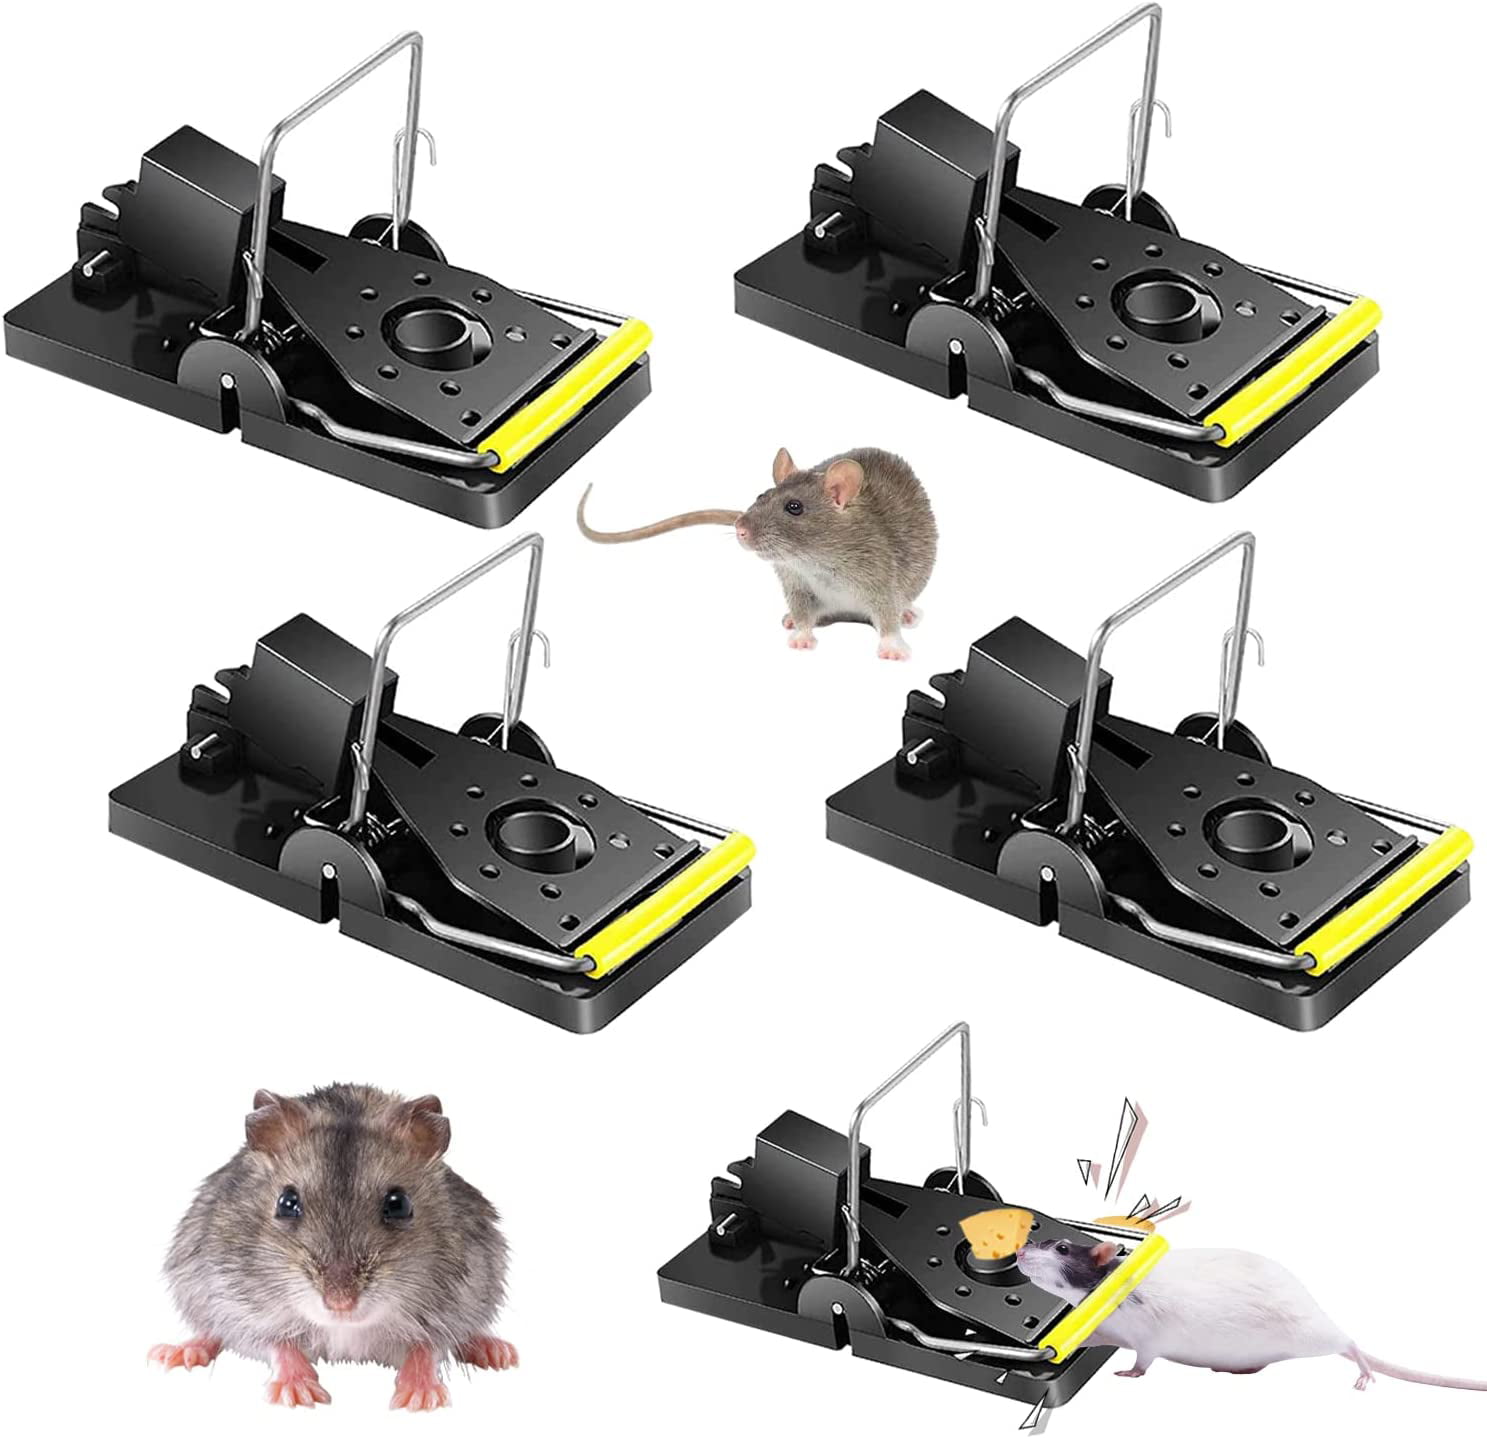  TOIUOT Mouse Traps Indoor for Home,Quick Sensitive Effective Mouse  Trap, Powerful Rat Traps Indoor with Teeth-Like Design Bait Cup, Reusable  Sanitary Mice Traps for House Indoor Outdoor(12 Pack) : Patio